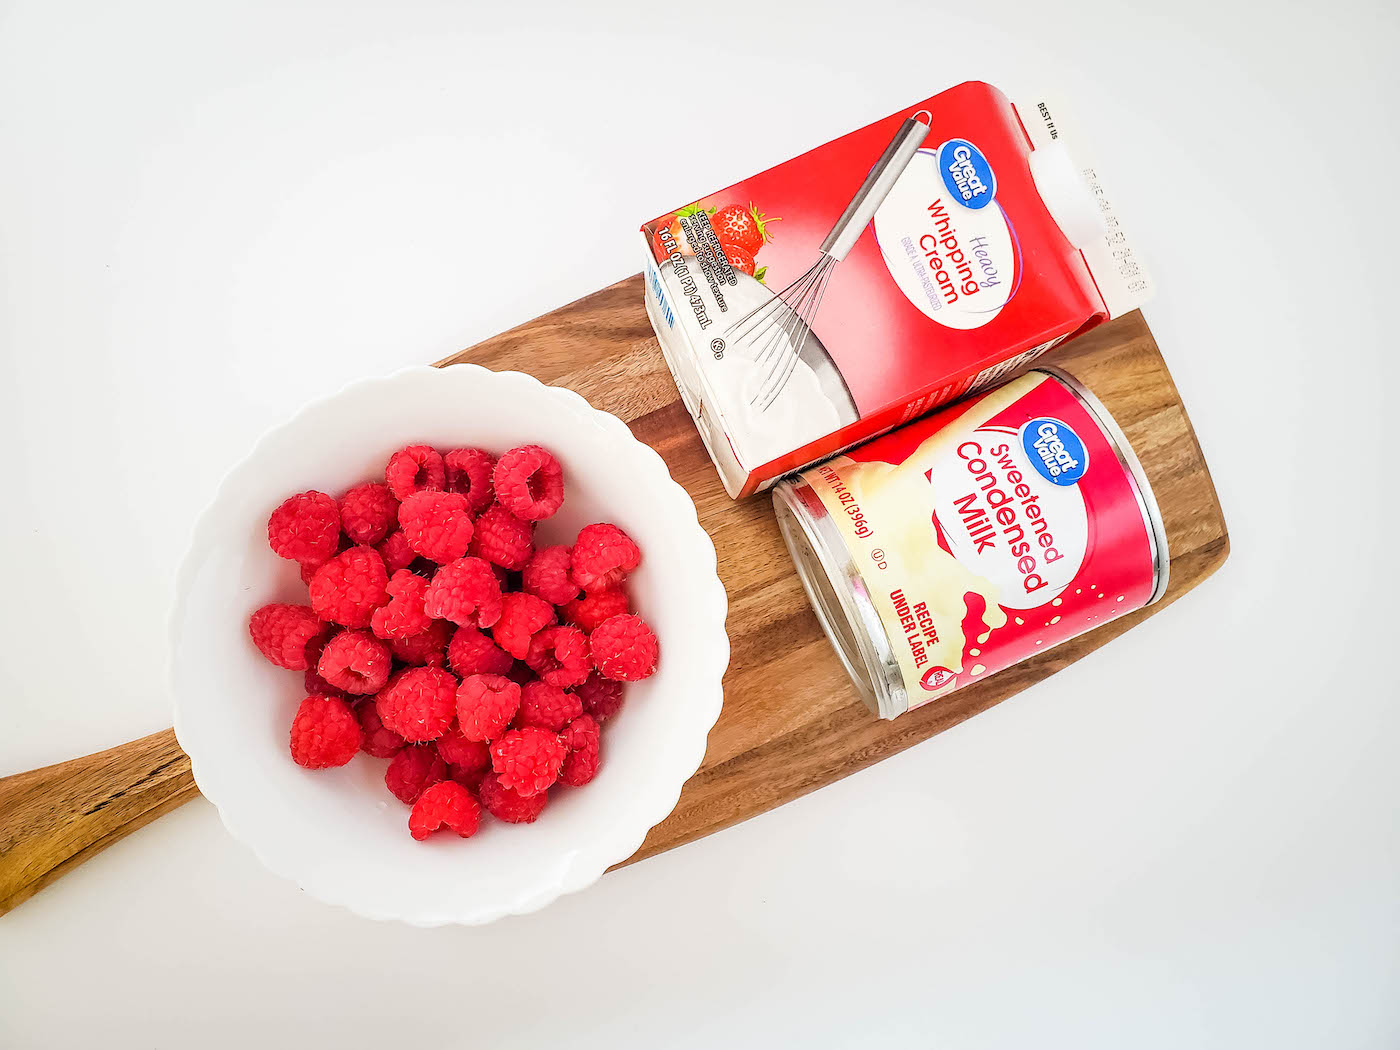 heavy whipping cream, sweetened condensed milk, and raspberries in a bowl on a breadboard